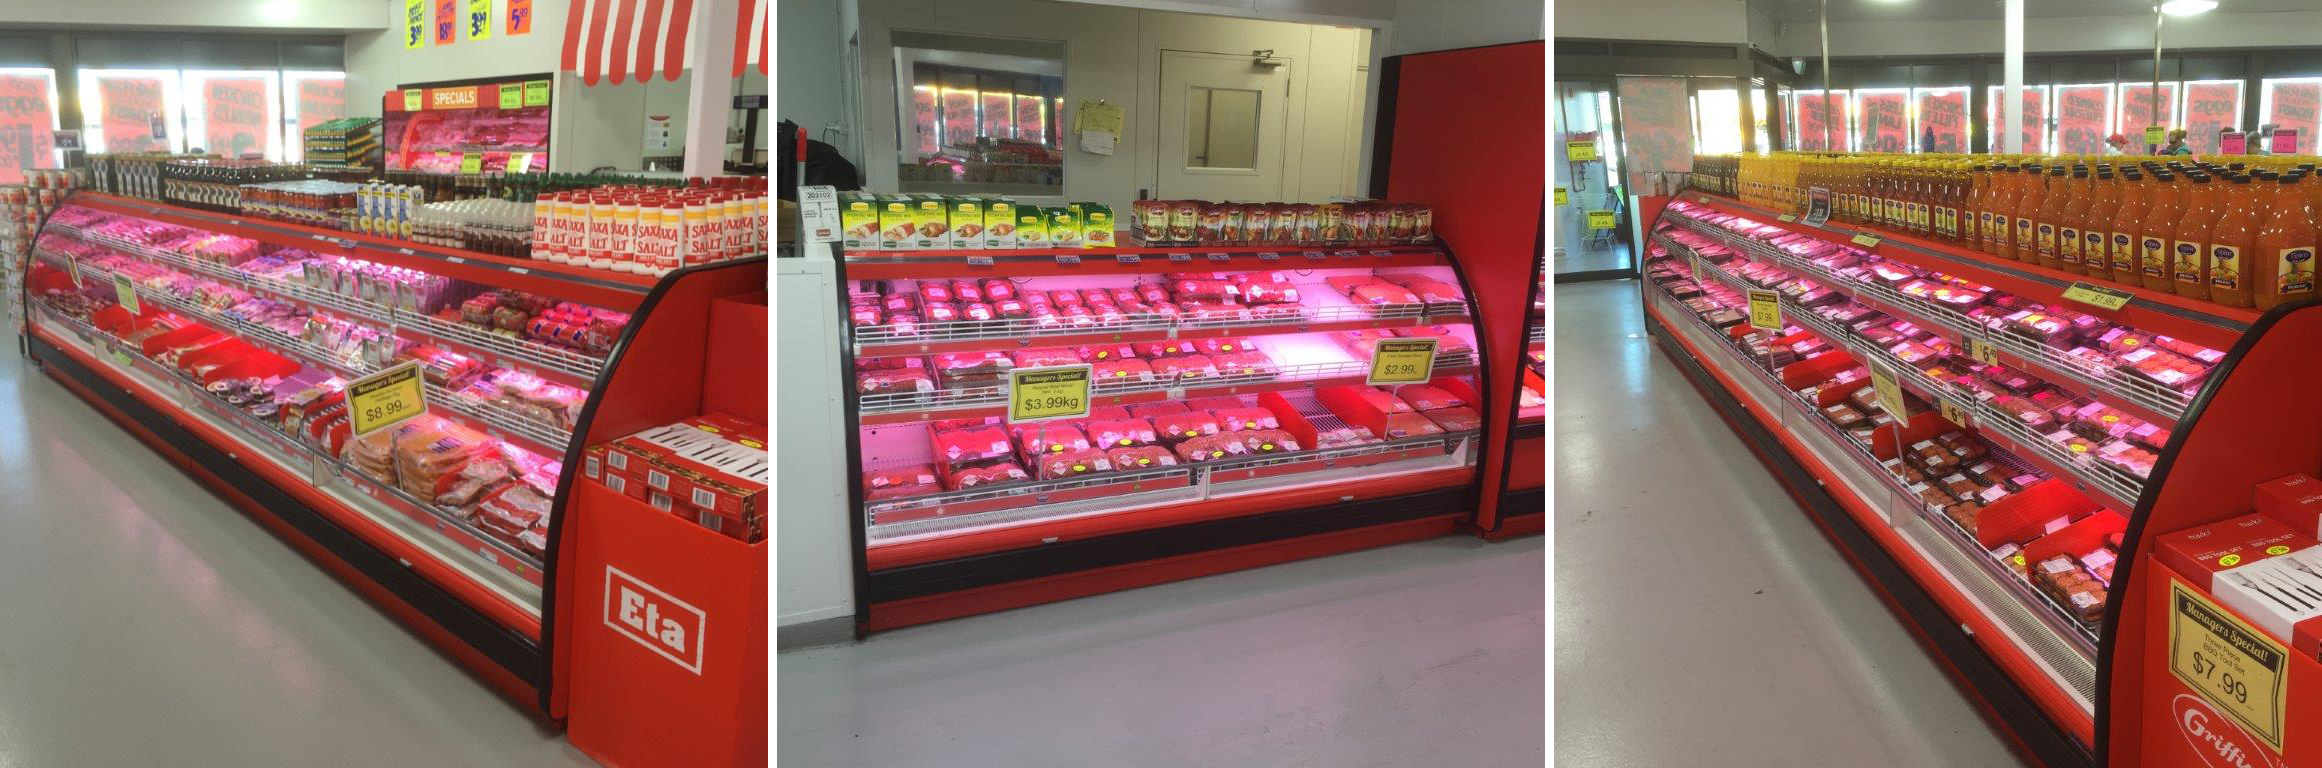 12 ft Low Vertical Multi-deck Meat Display Cases